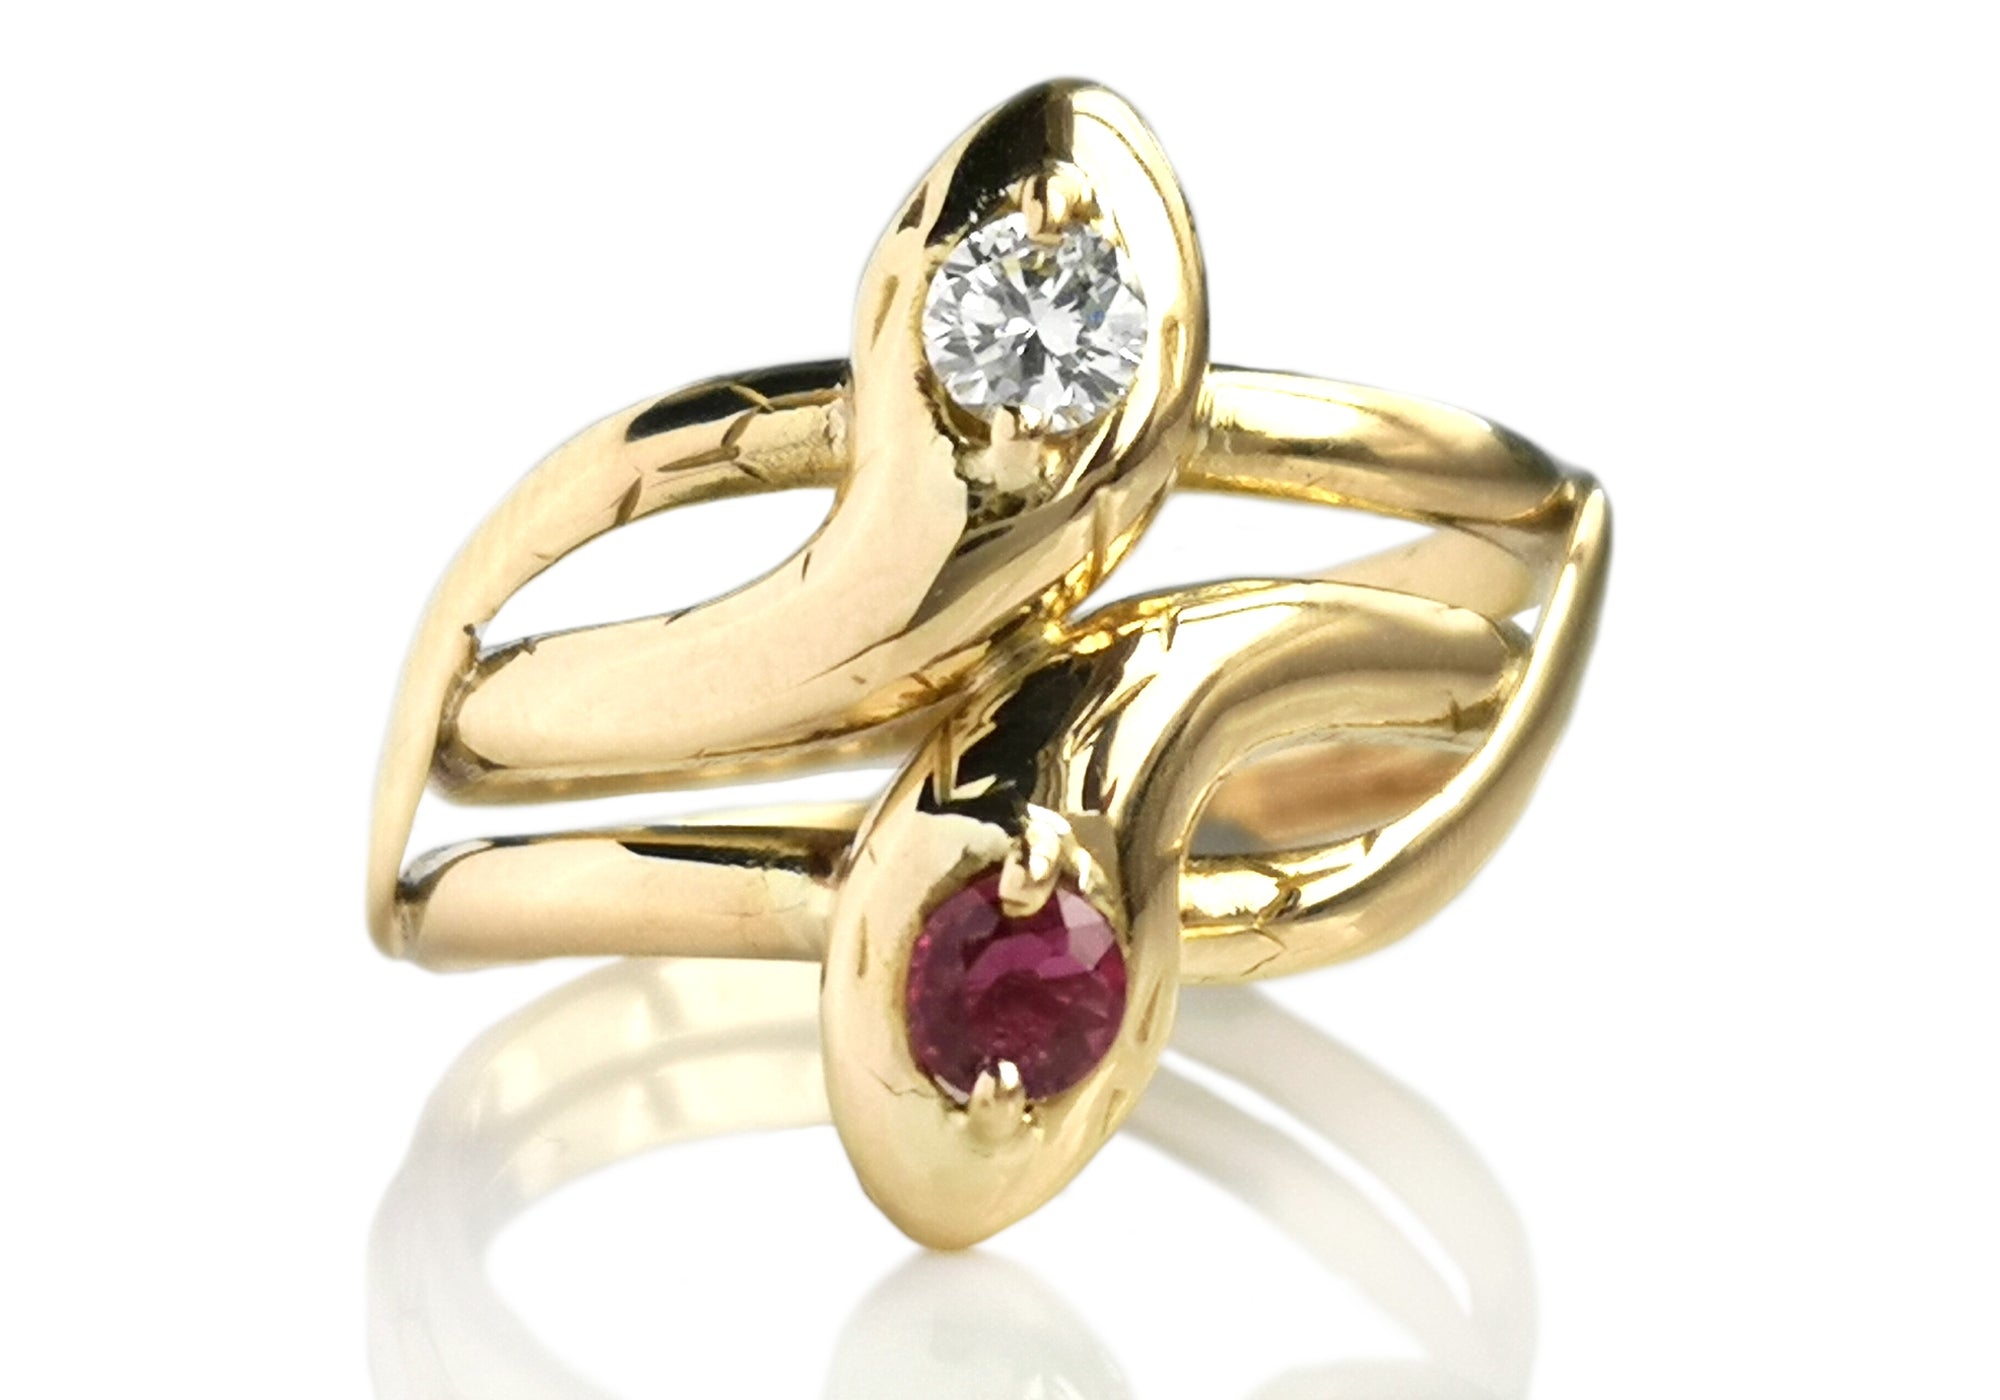 Vintage Double Snake Head Serpent Ring With Ruby & Diamond in 18k Gold